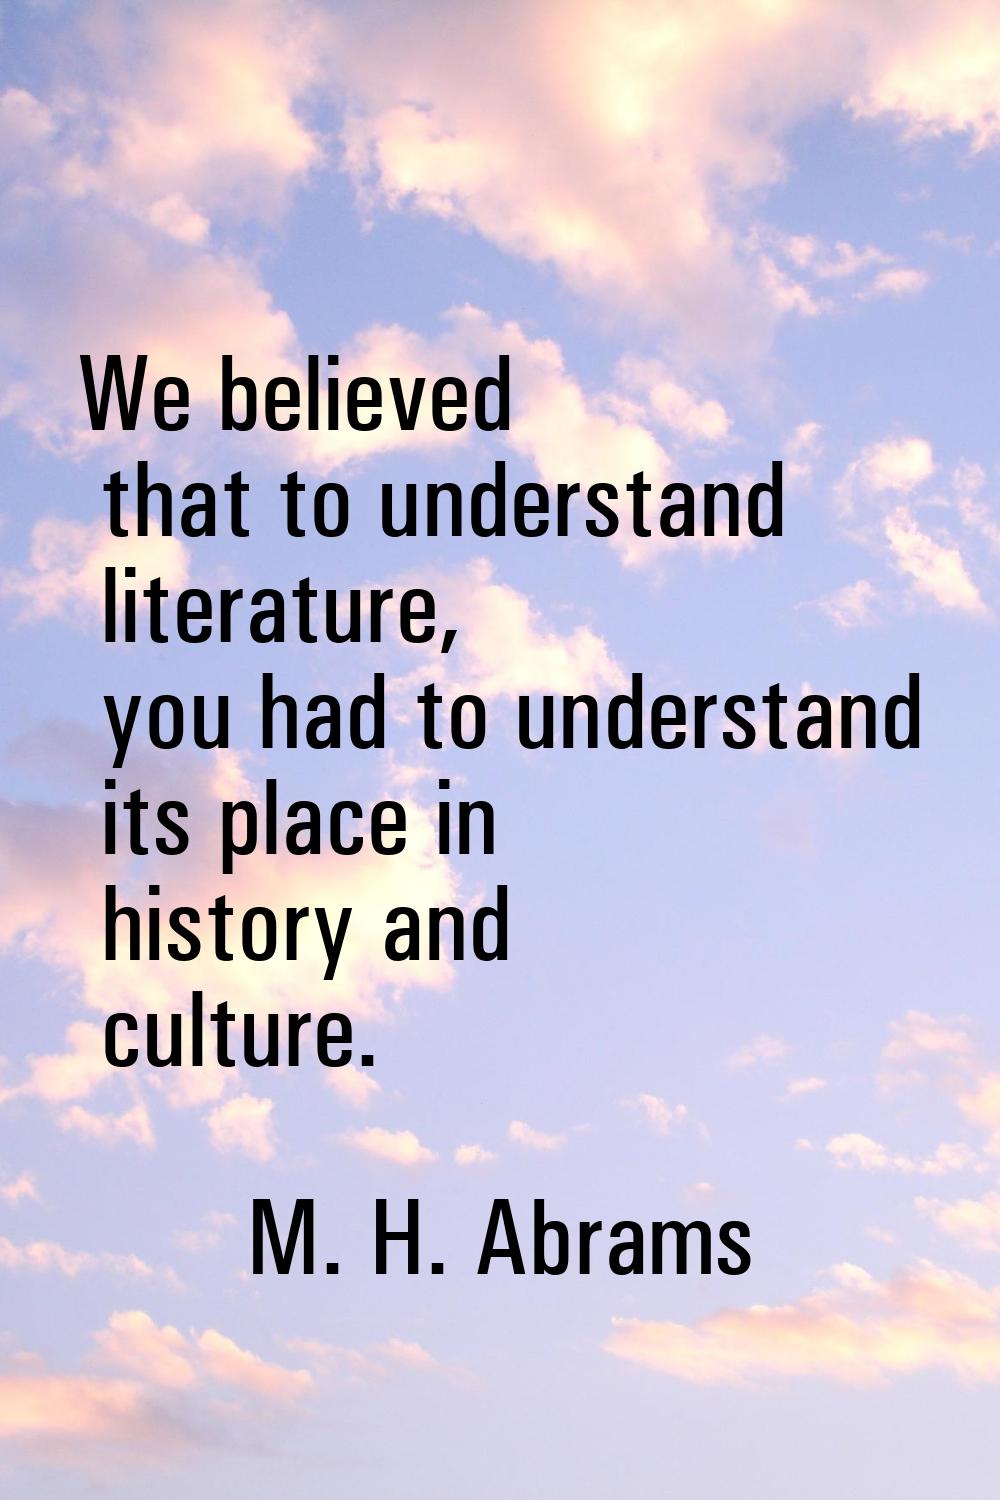 We believed that to understand literature, you had to understand its place in history and culture.